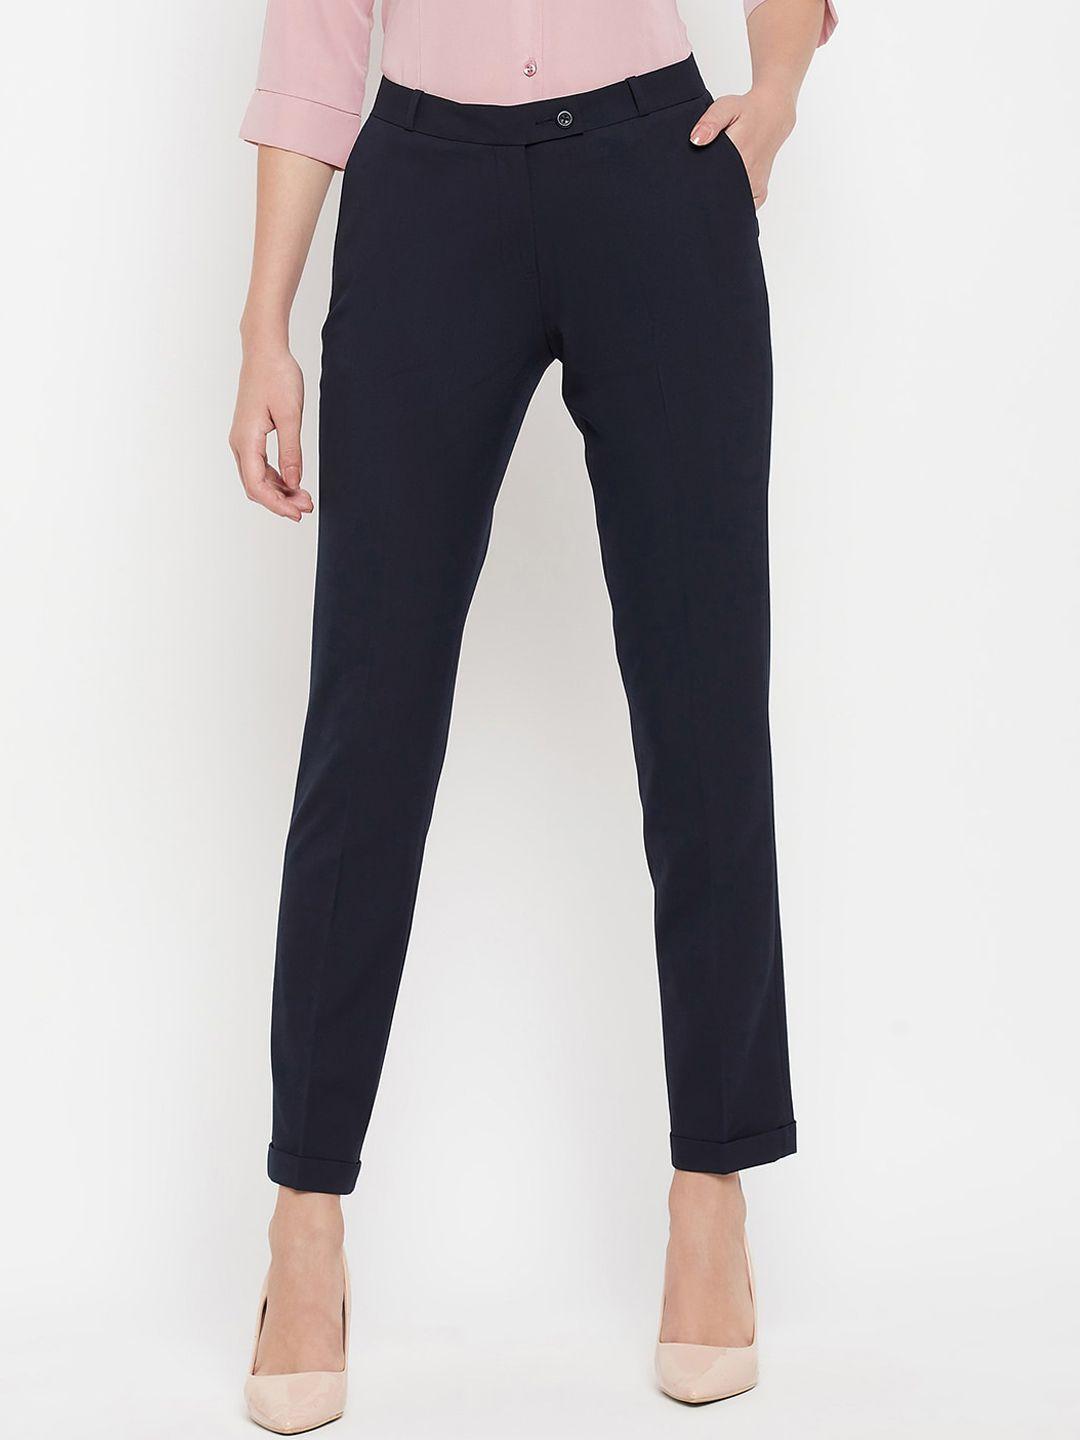 crozo-by-cantabil-women-mid-rise-formal-trousers